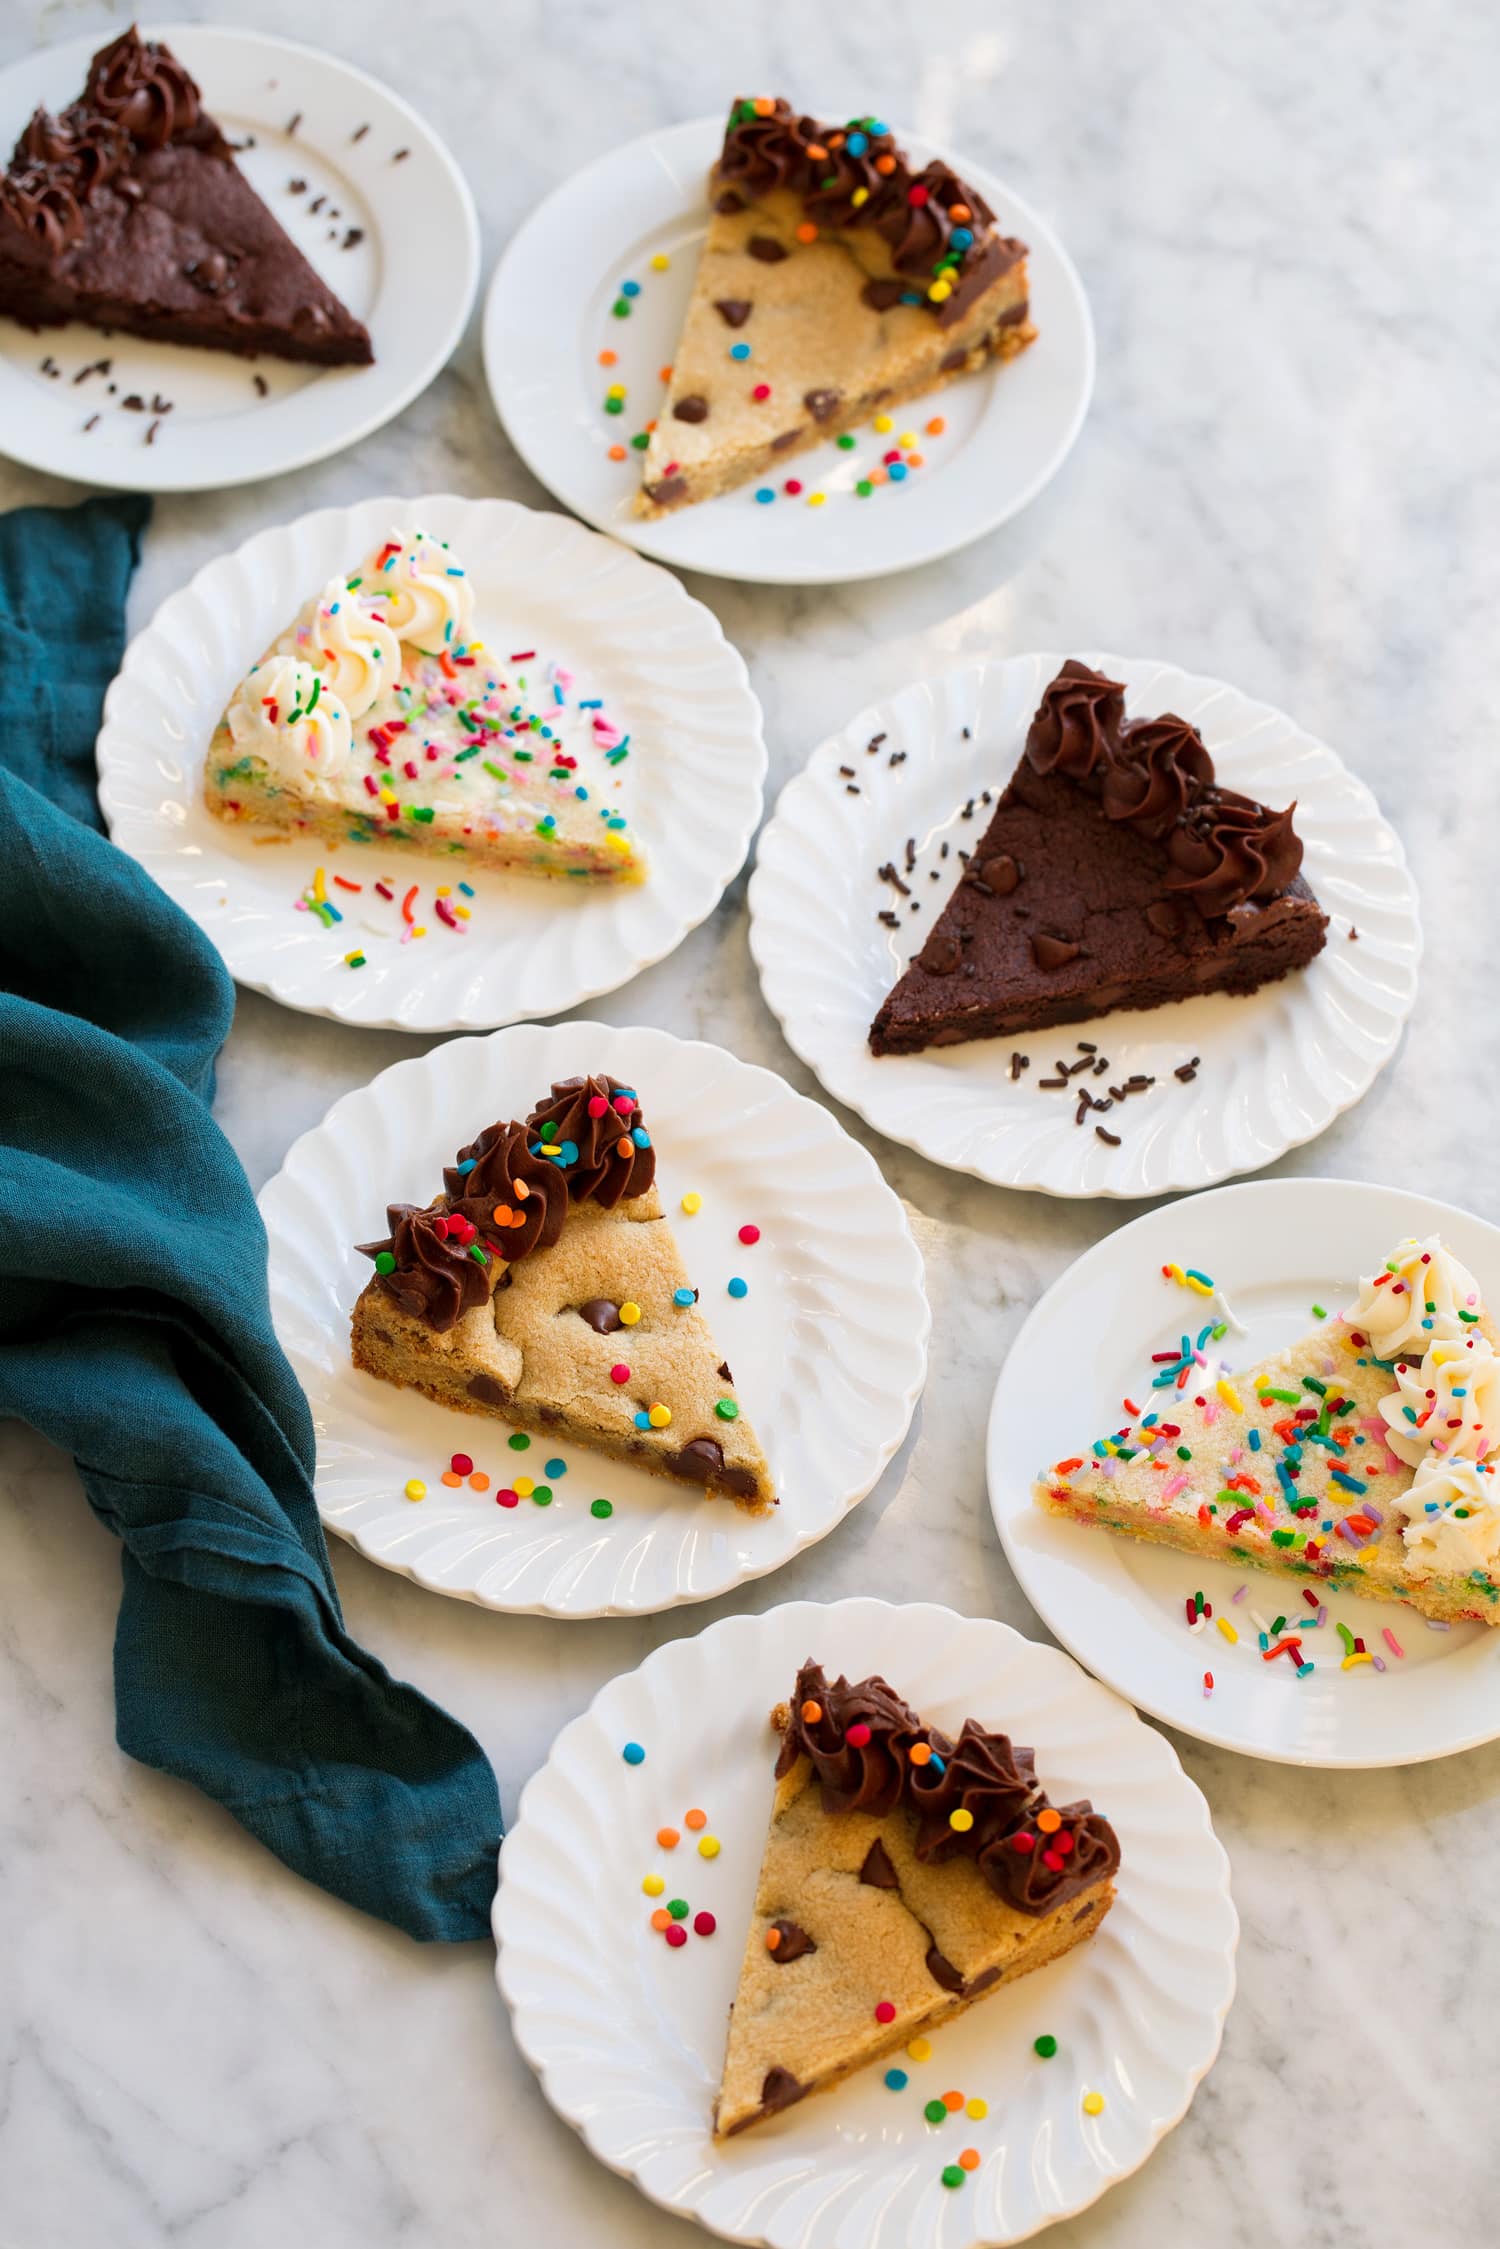 Slices of various flavors of cookie cakes on dessert plates.